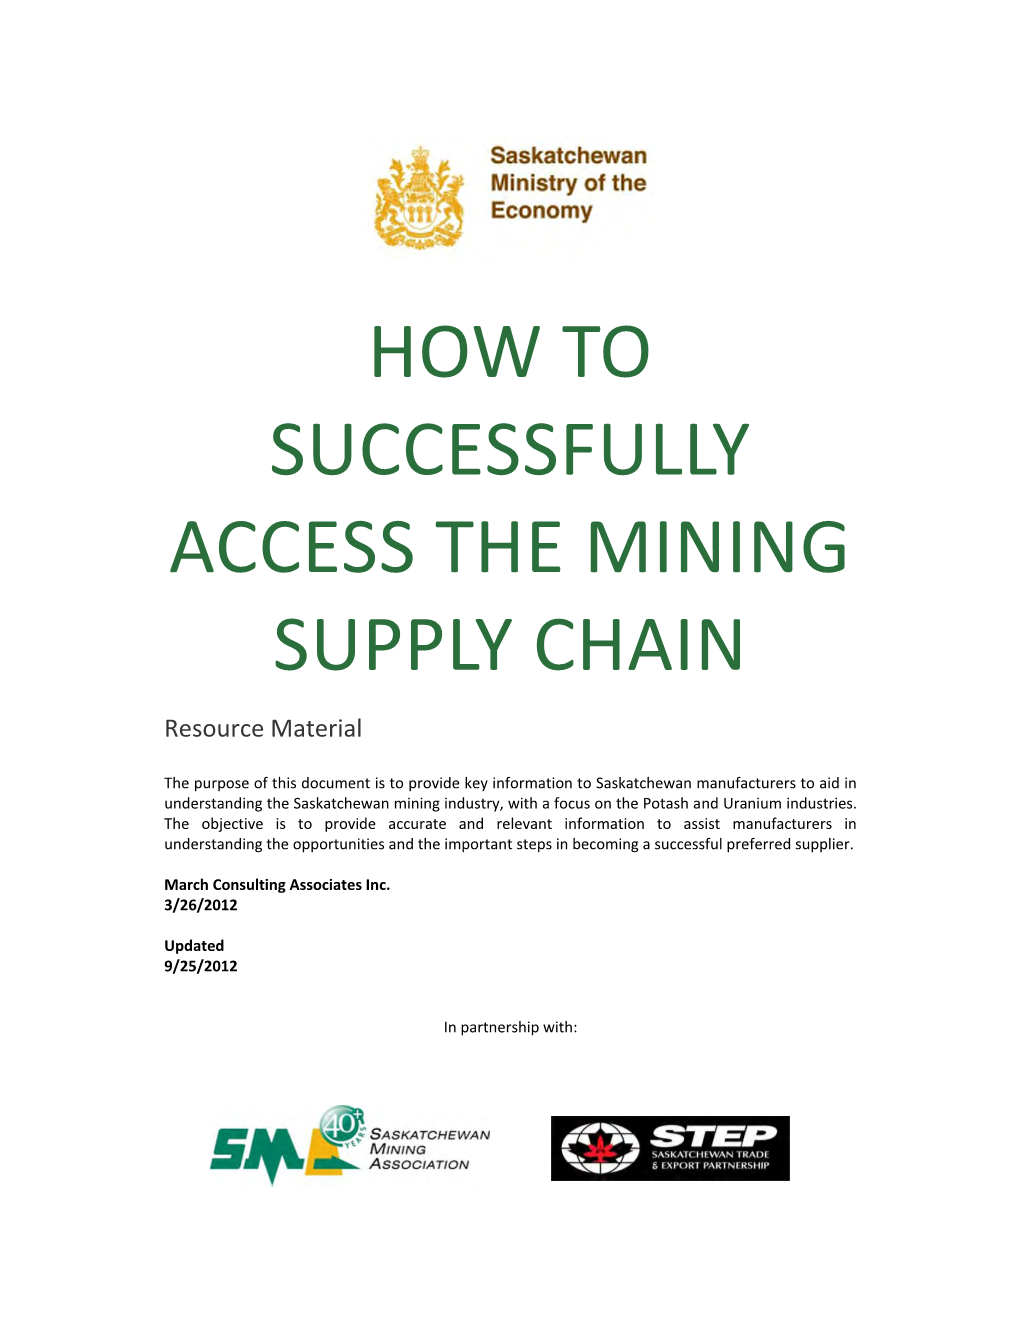 How to Successfully Access the Mining Supply Chain